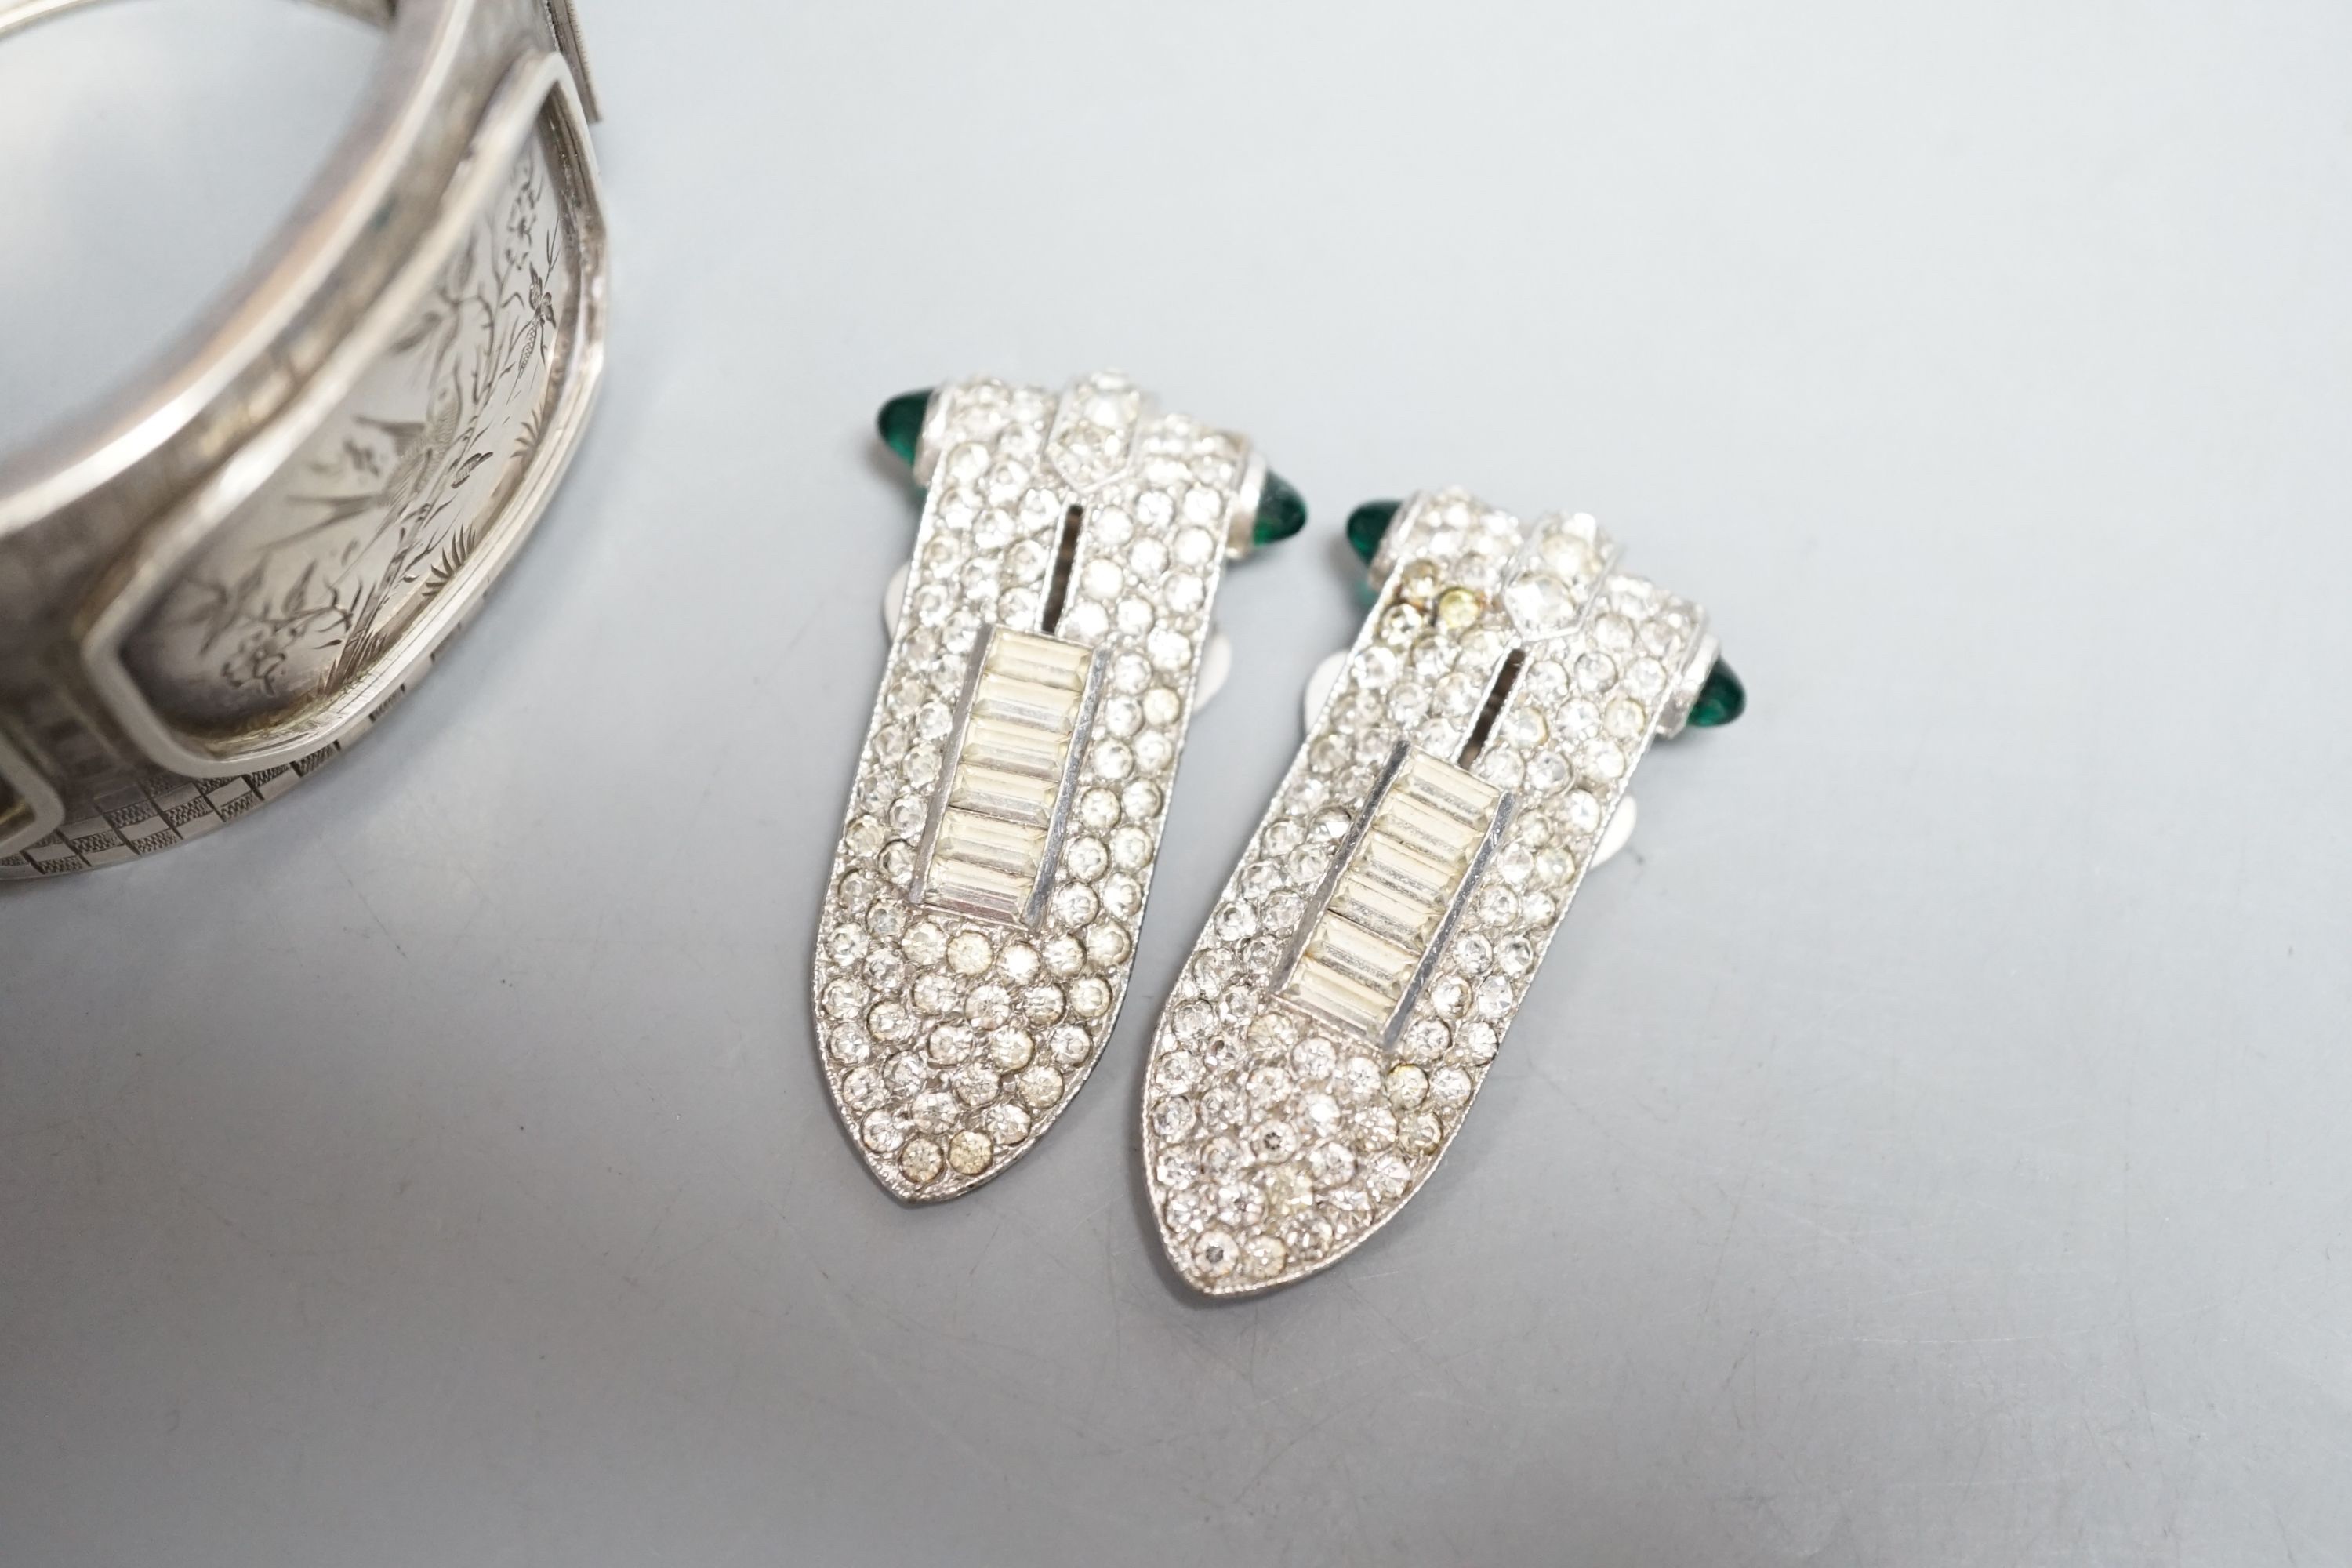 A pair of art deco paste clip earrings and a sterling bangle.